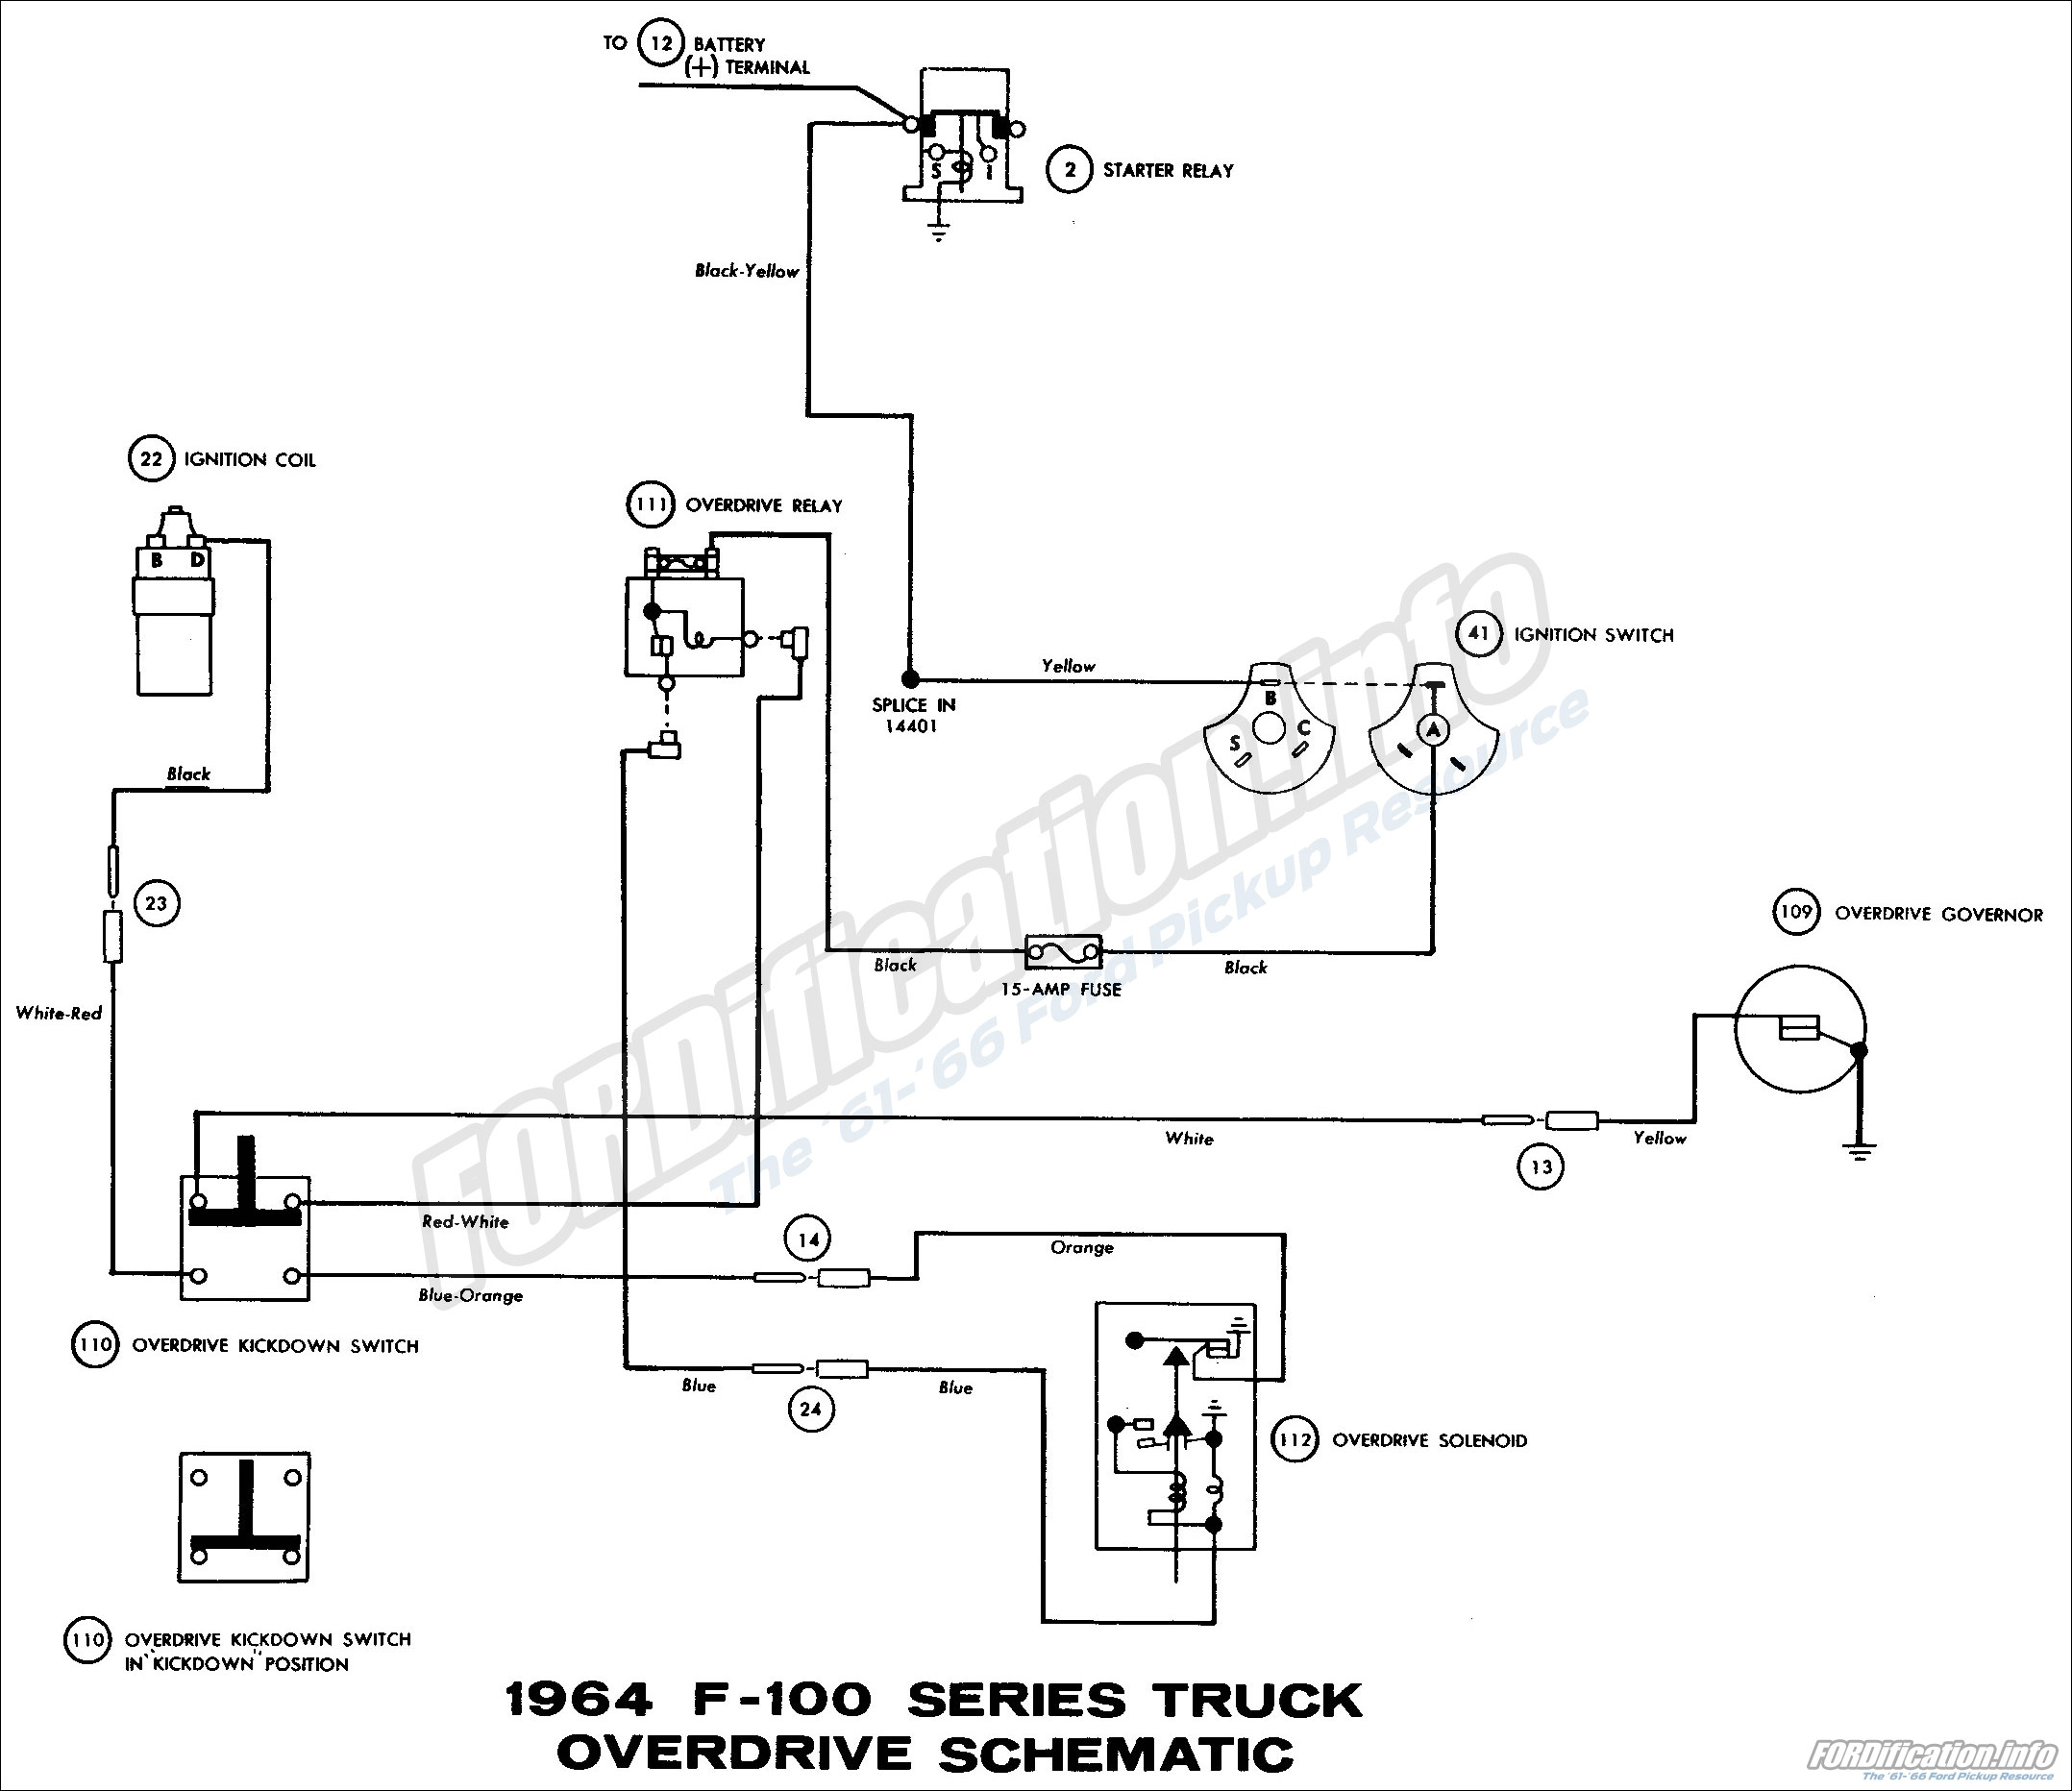 Ford Ignition Switch Wiring Diagram from www.fordification.info